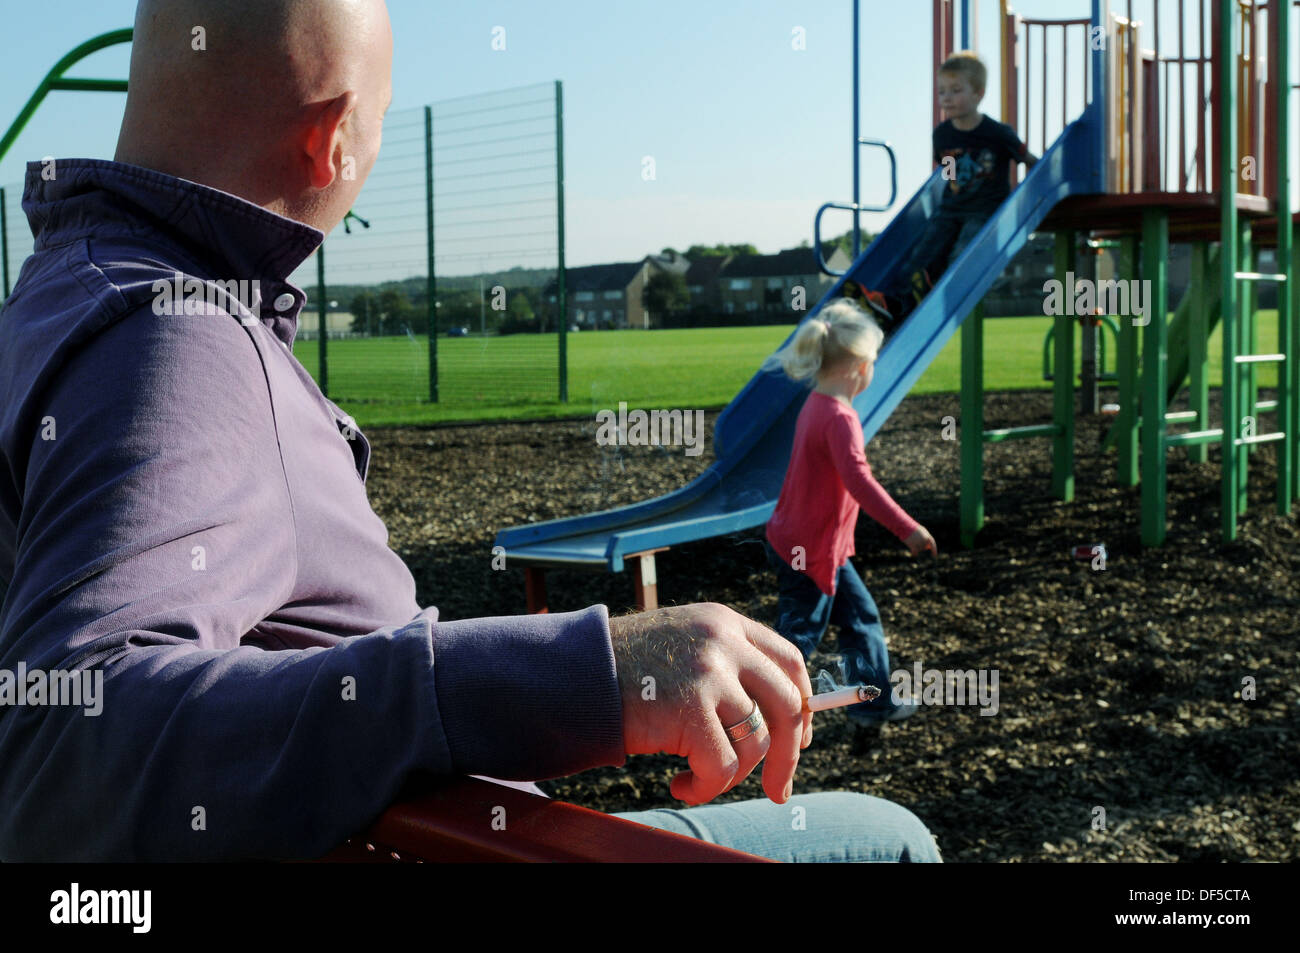 man smoking in a children's playground with a girl and boy playing on a slide Stock Photo